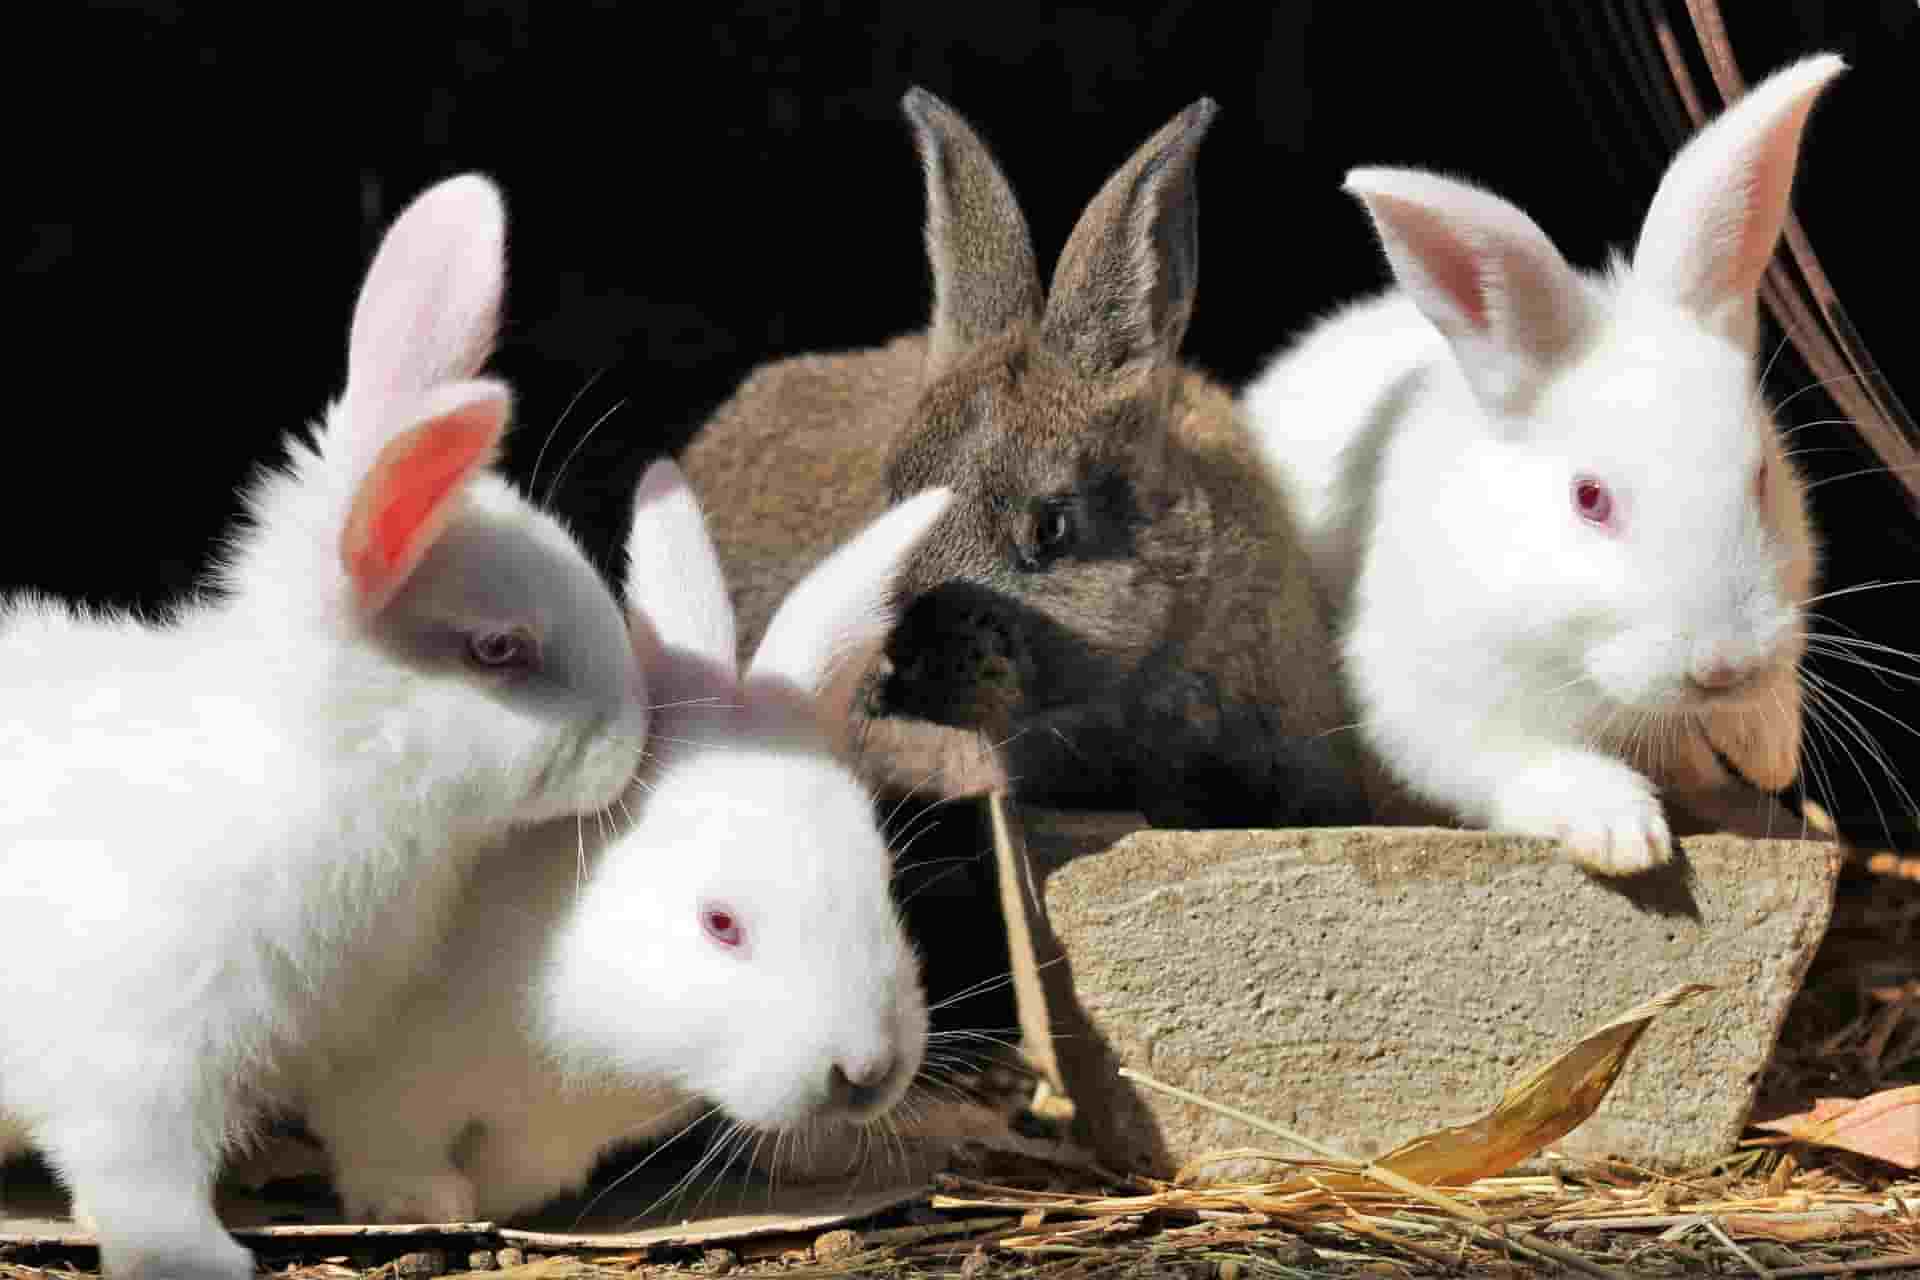 can rabbits eat Eggplants without any issue?